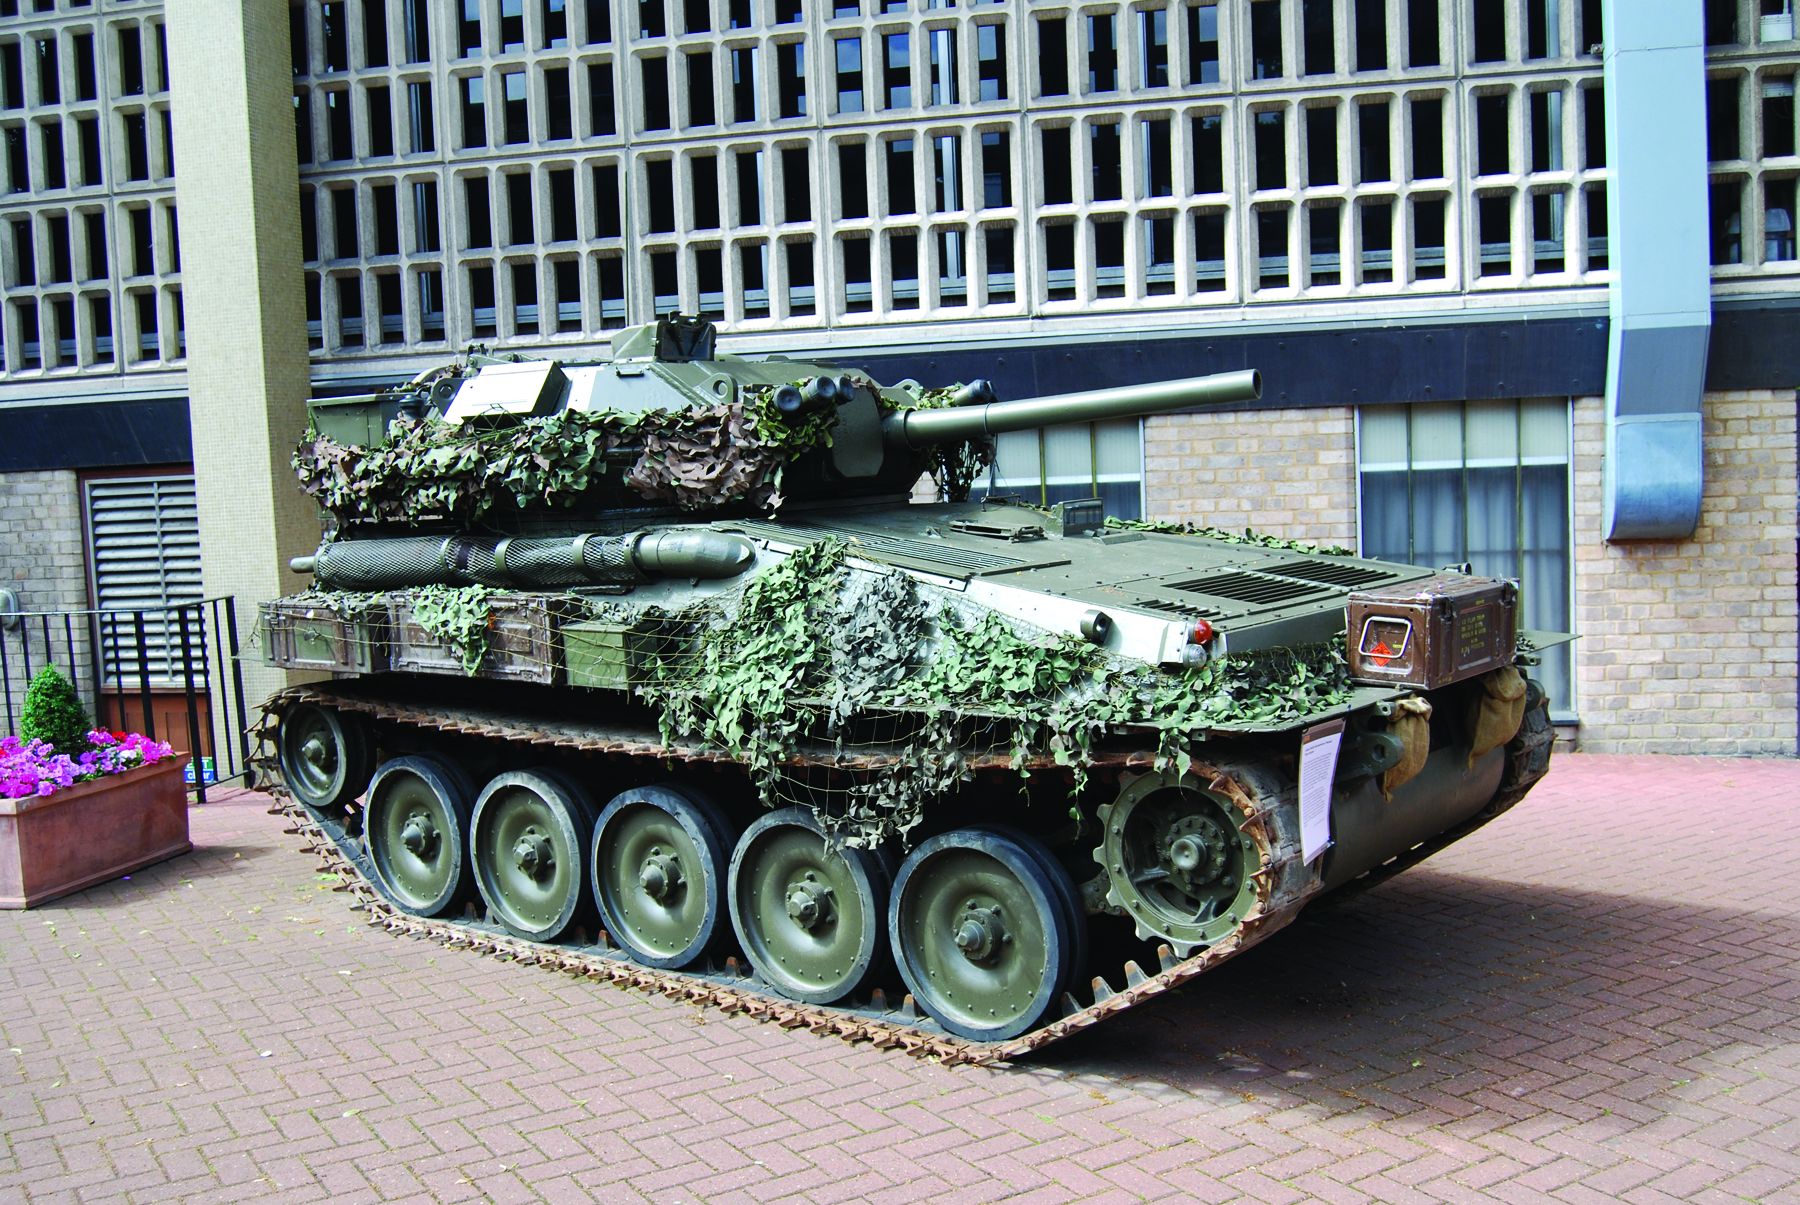 While the National Army Museum lacks the space for extensive display of vehicles or field guns, the outside is usually “protected” by an armored vehicle or two.